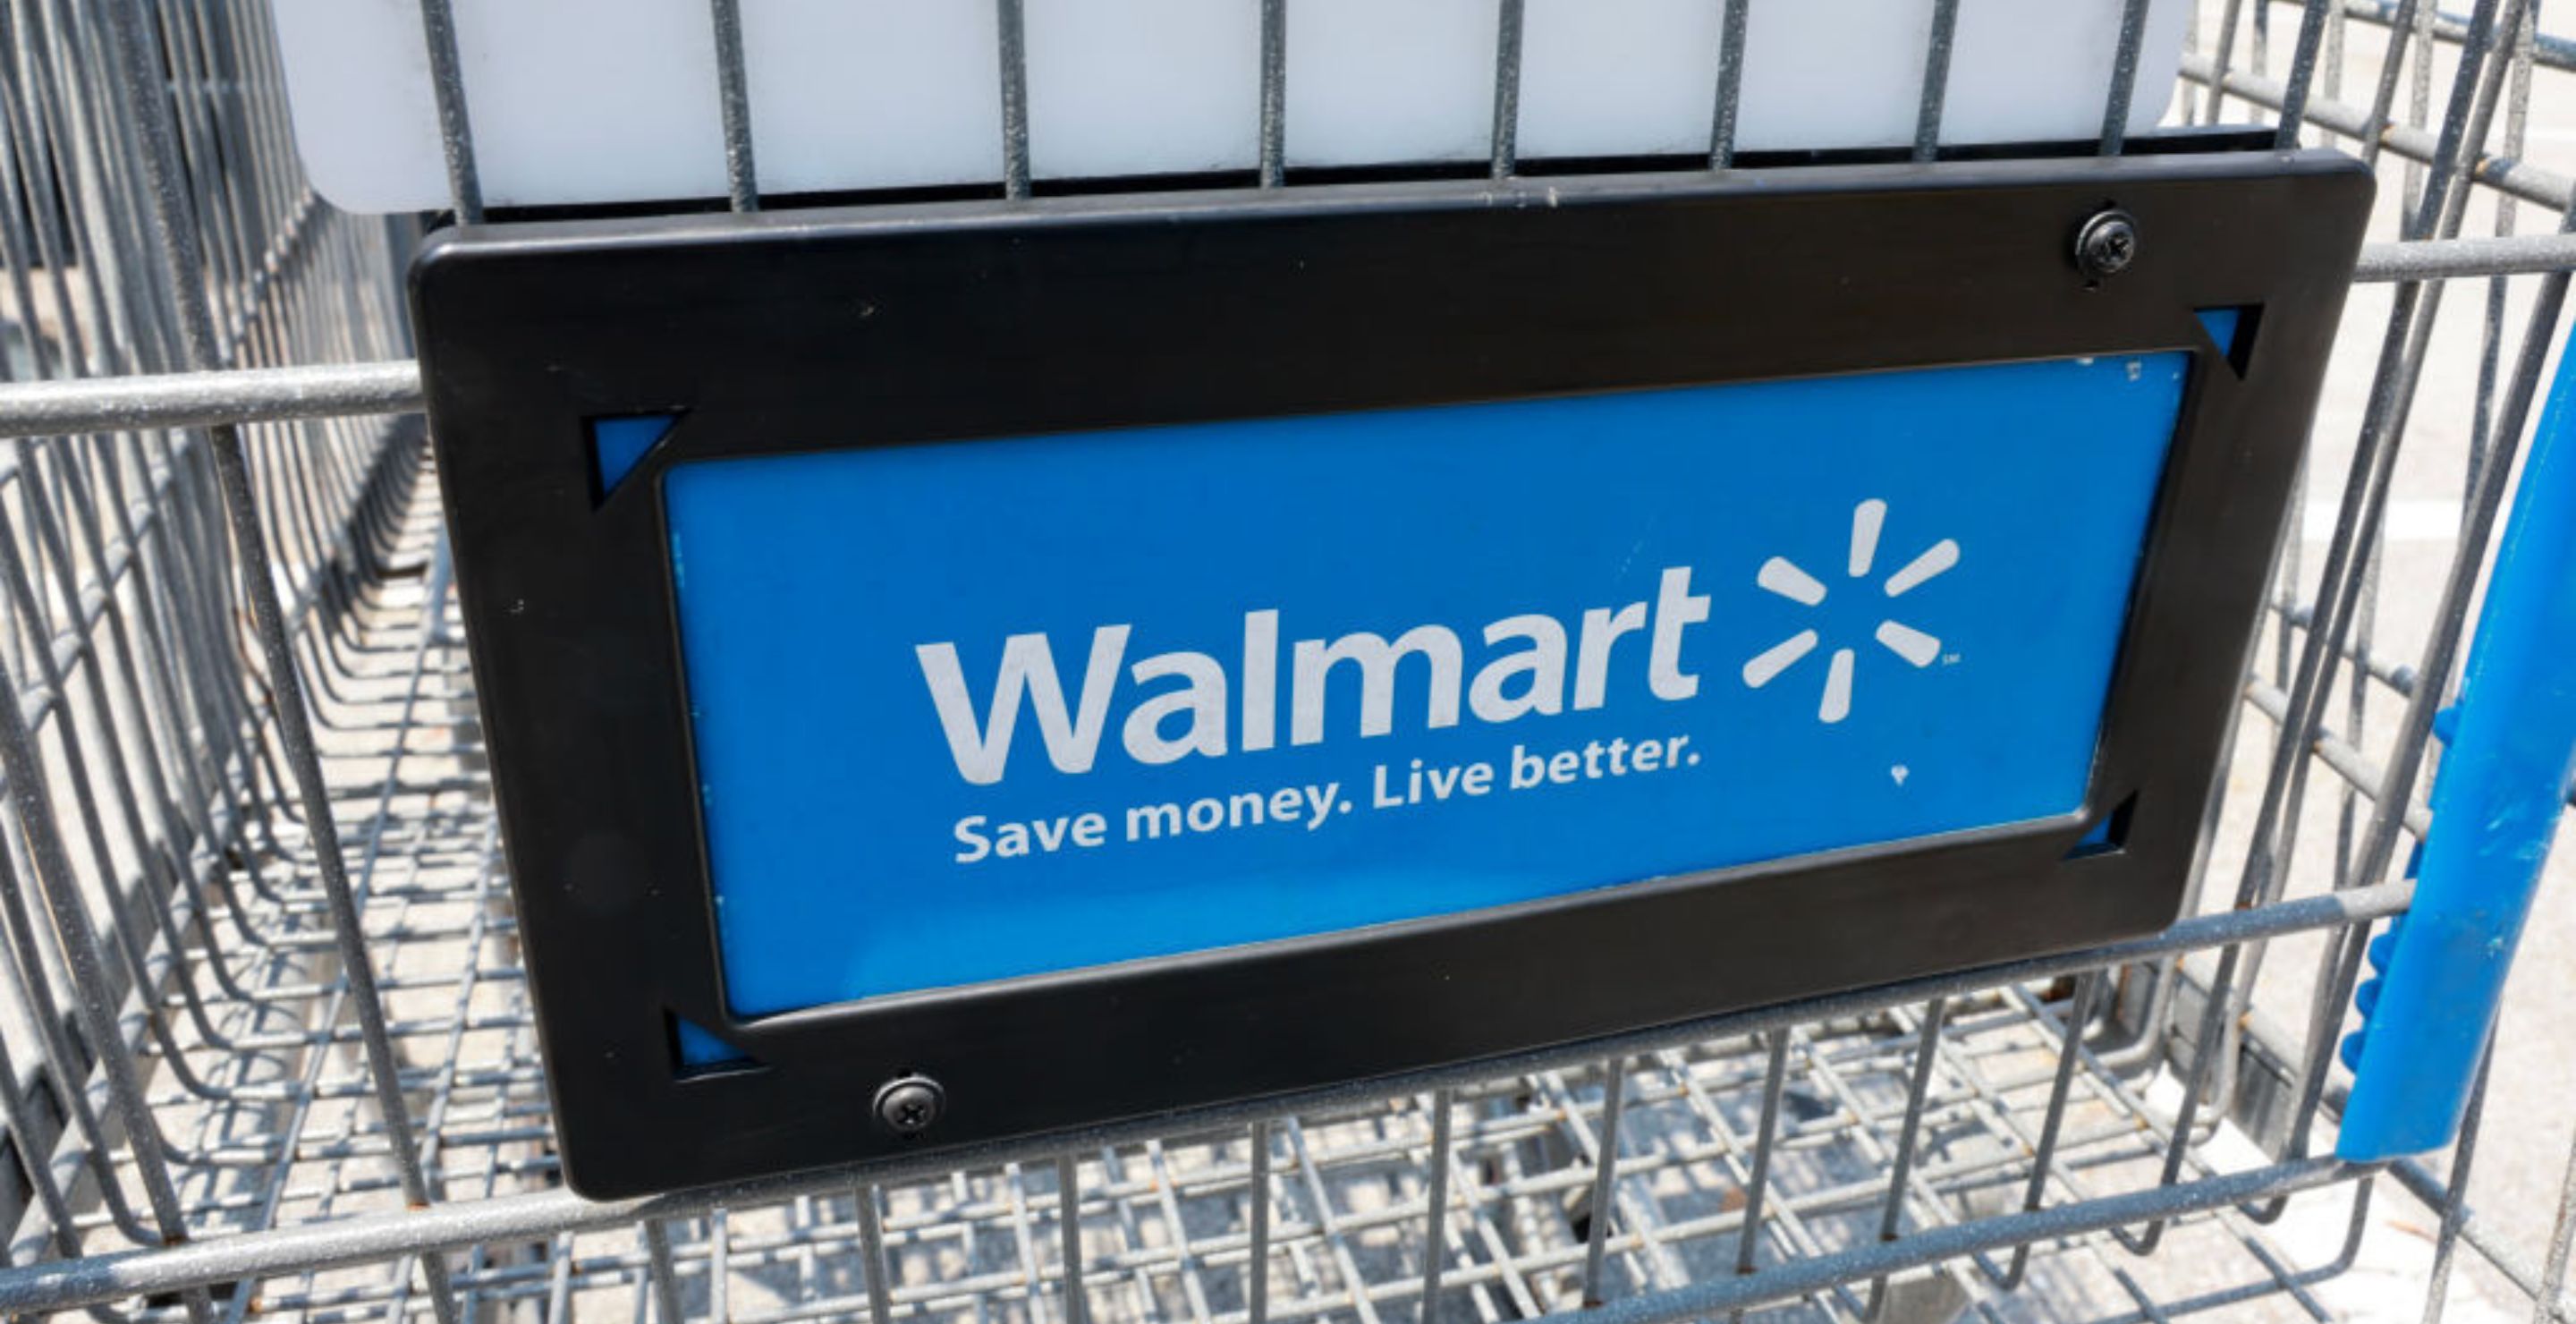 Walmart Customers Are Furious After Chain Allegedly Over-Charged At Self-Checkout